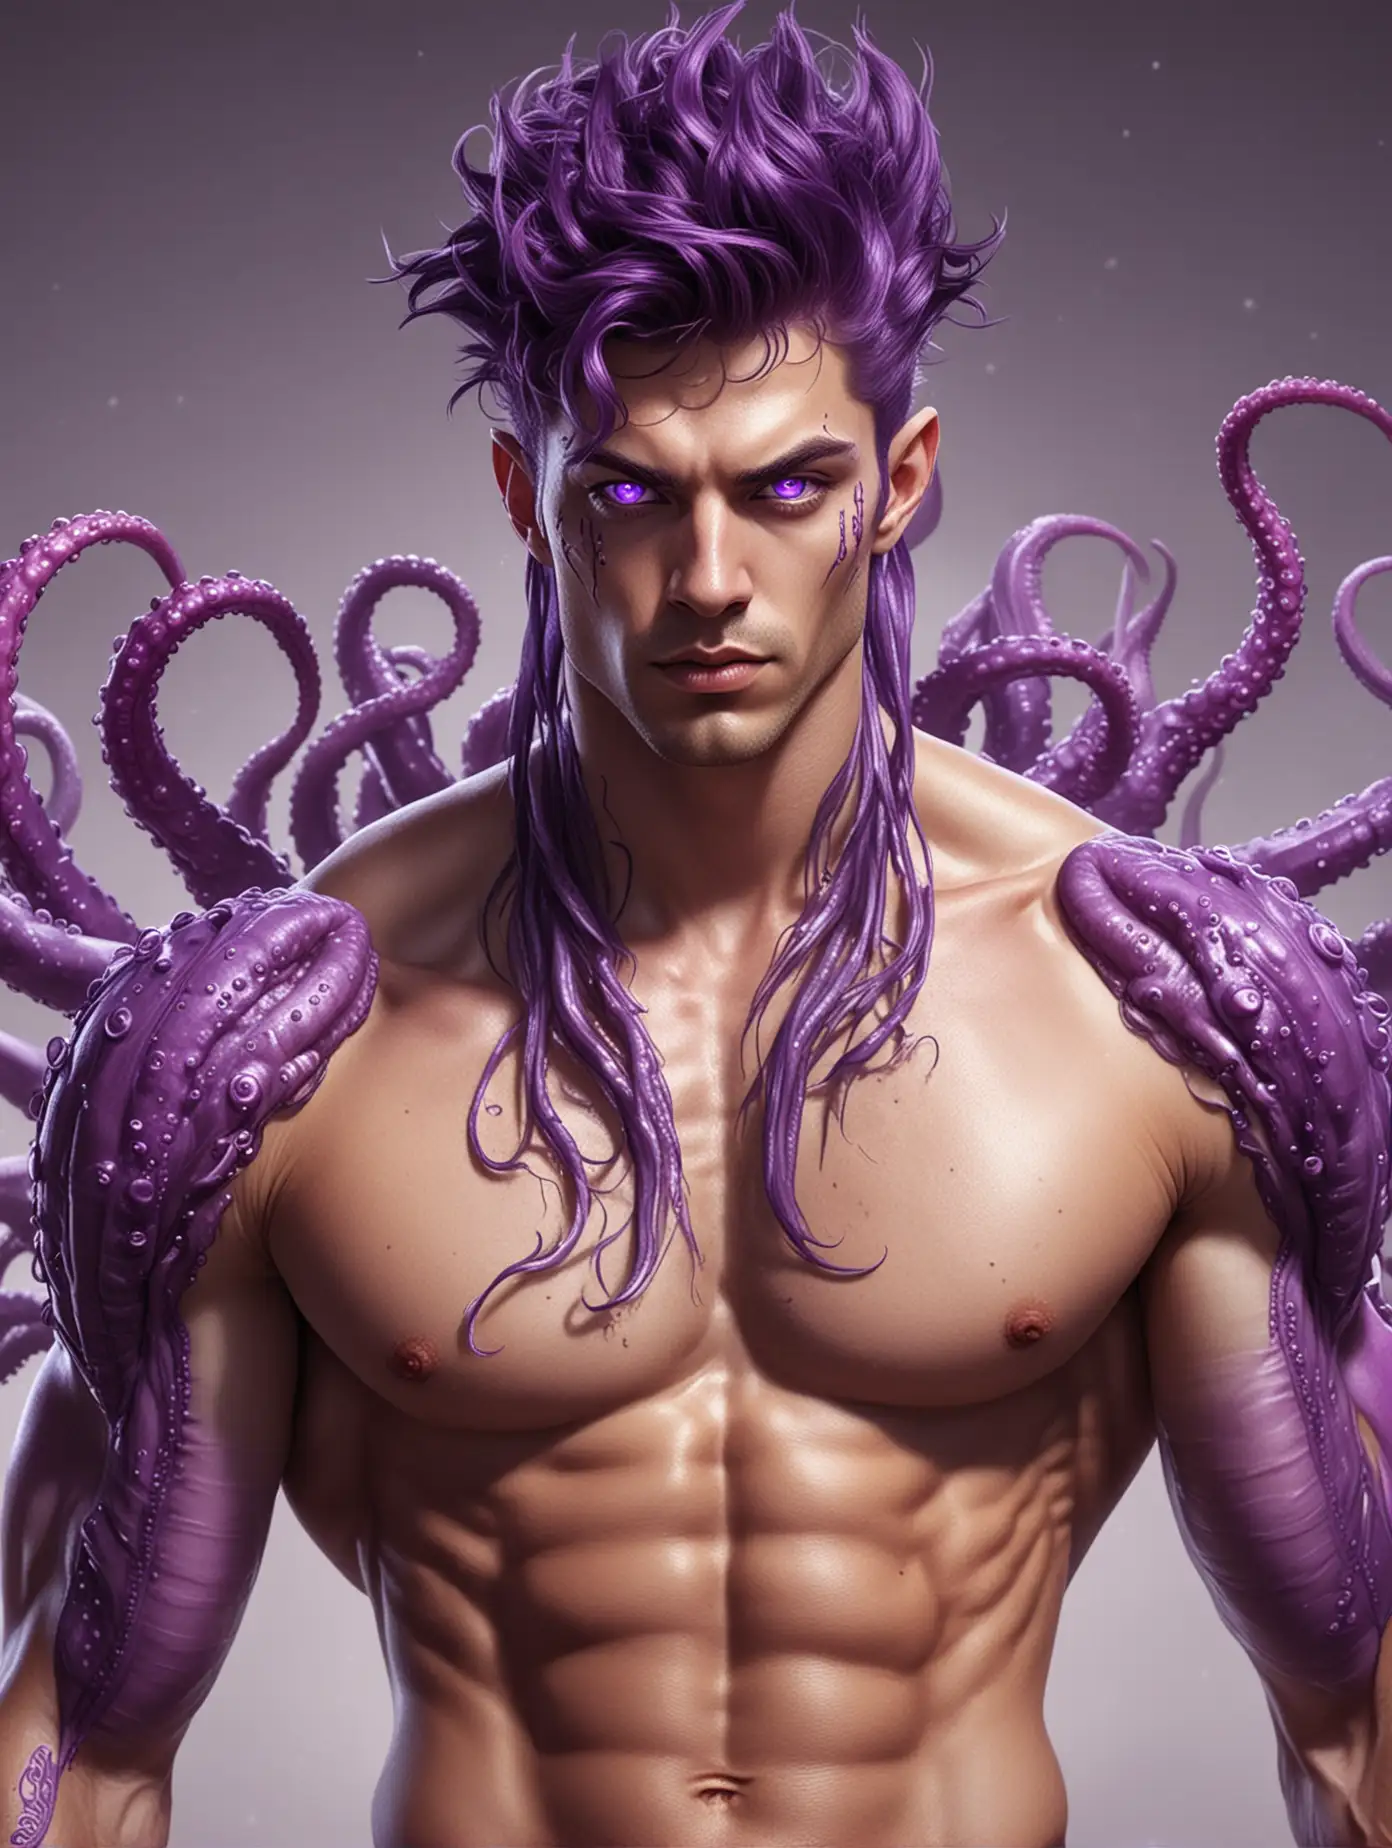 Handsome Shirtless Alien Man with Purple Tentacles and Abs